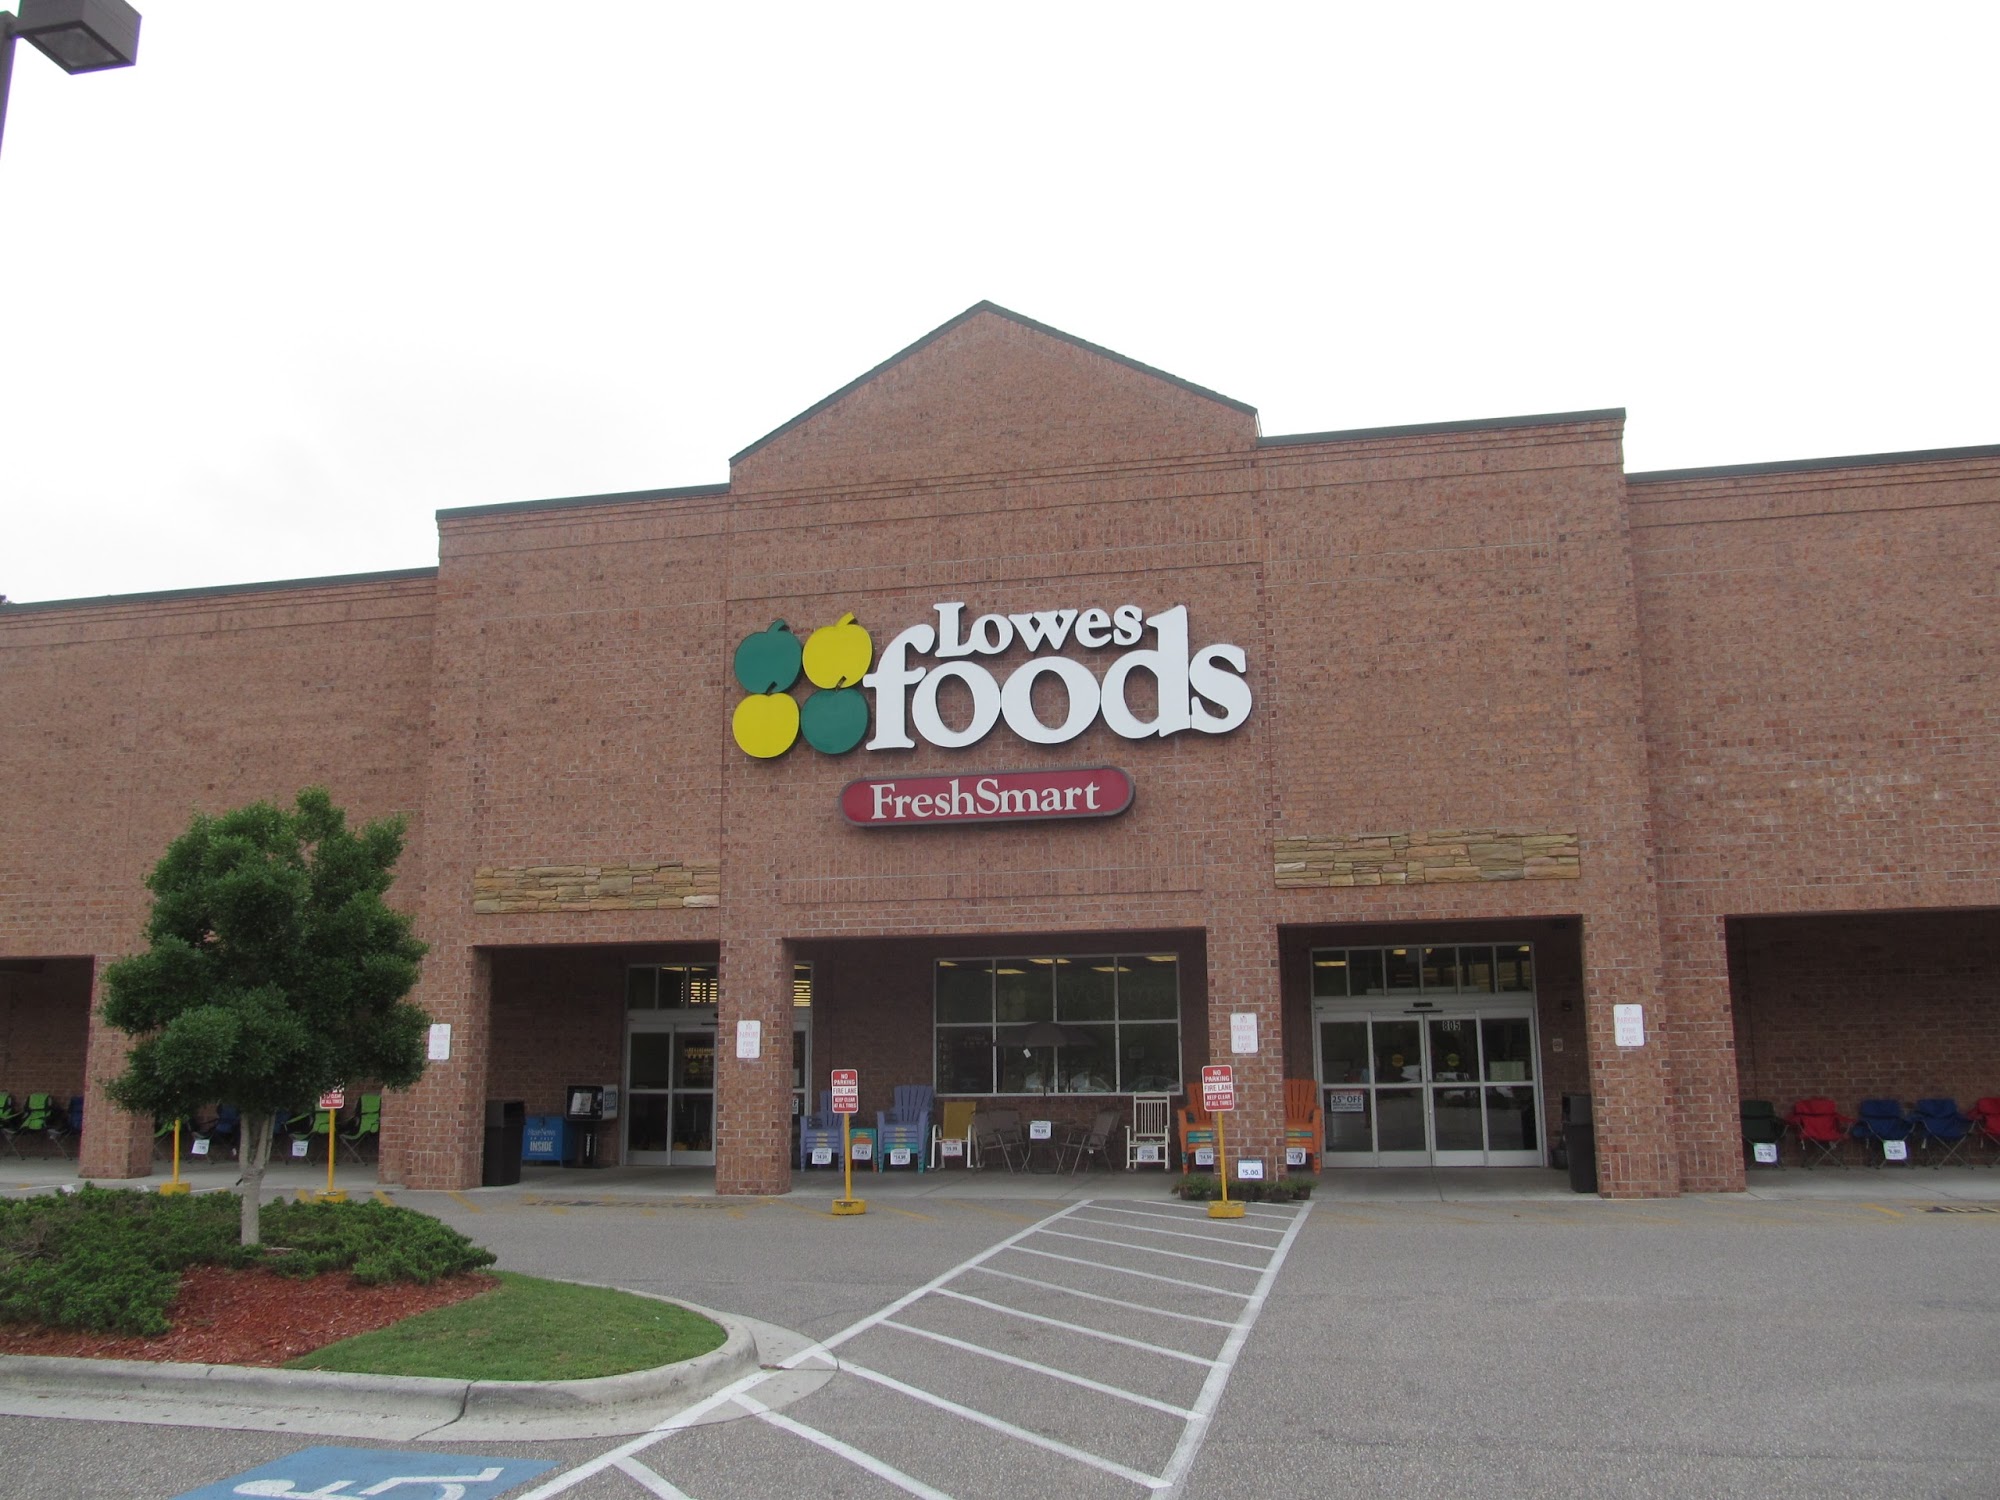 Lowes Foods on Pine Grove Drive